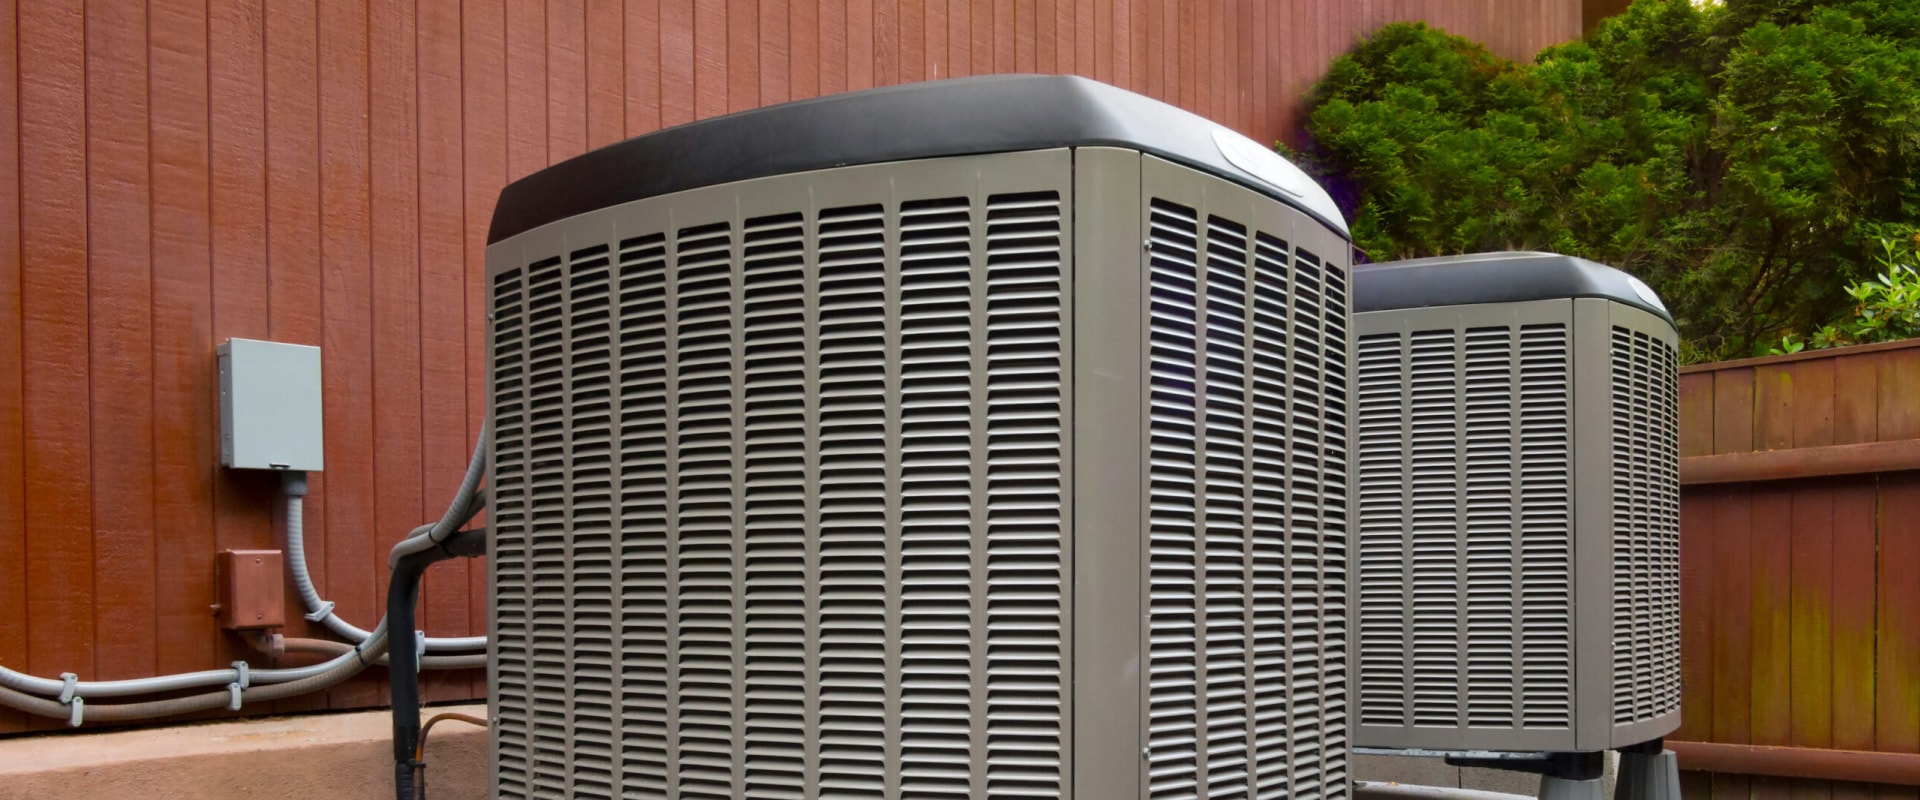 Why Choosing the Right Brand for Your HVAC Unit is Crucial